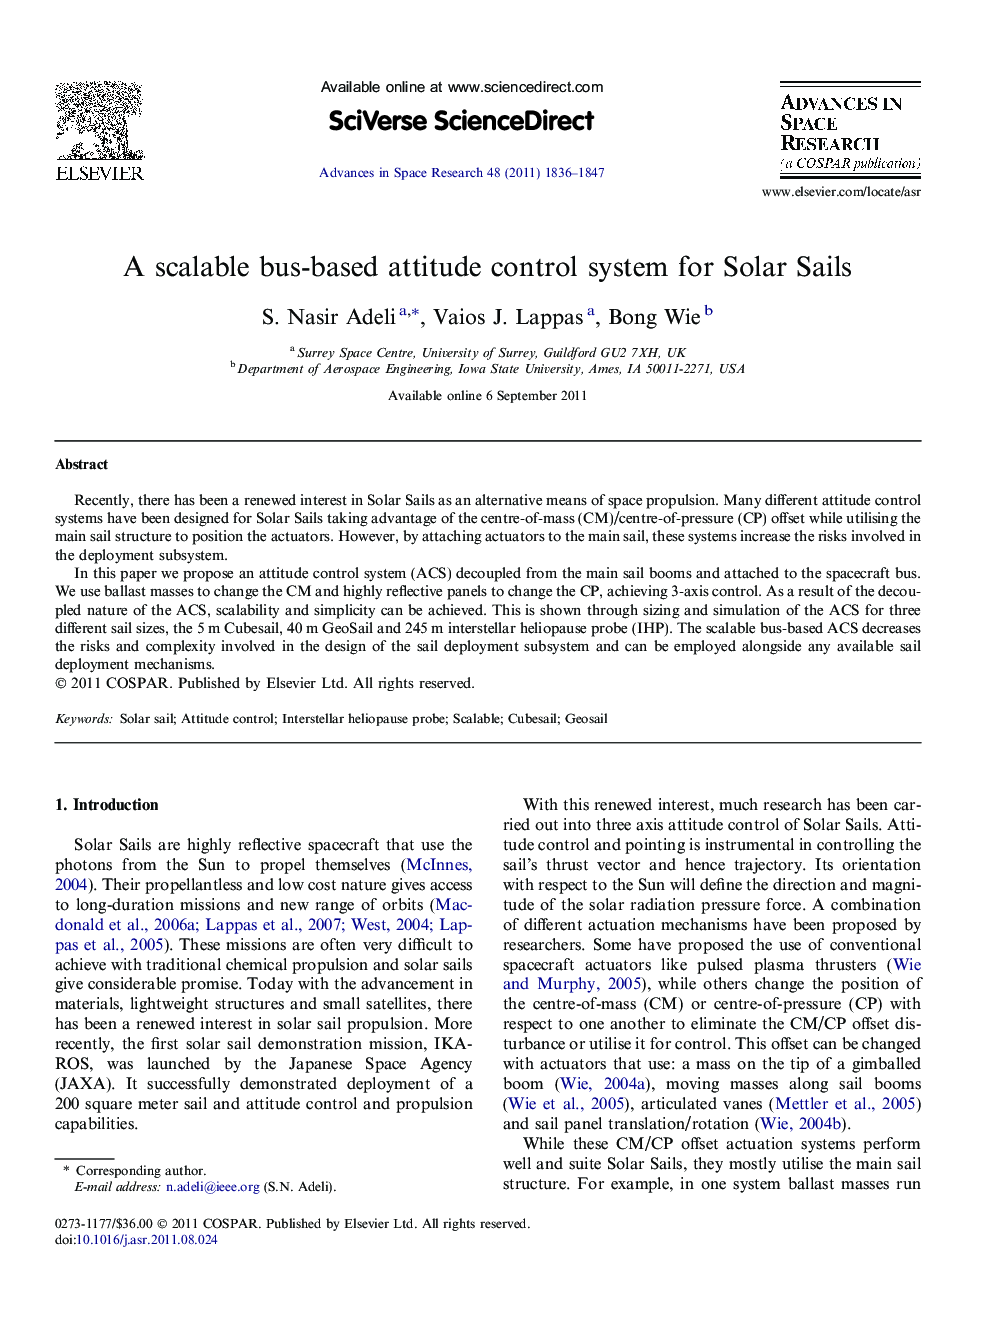 A scalable bus-based attitude control system for Solar Sails